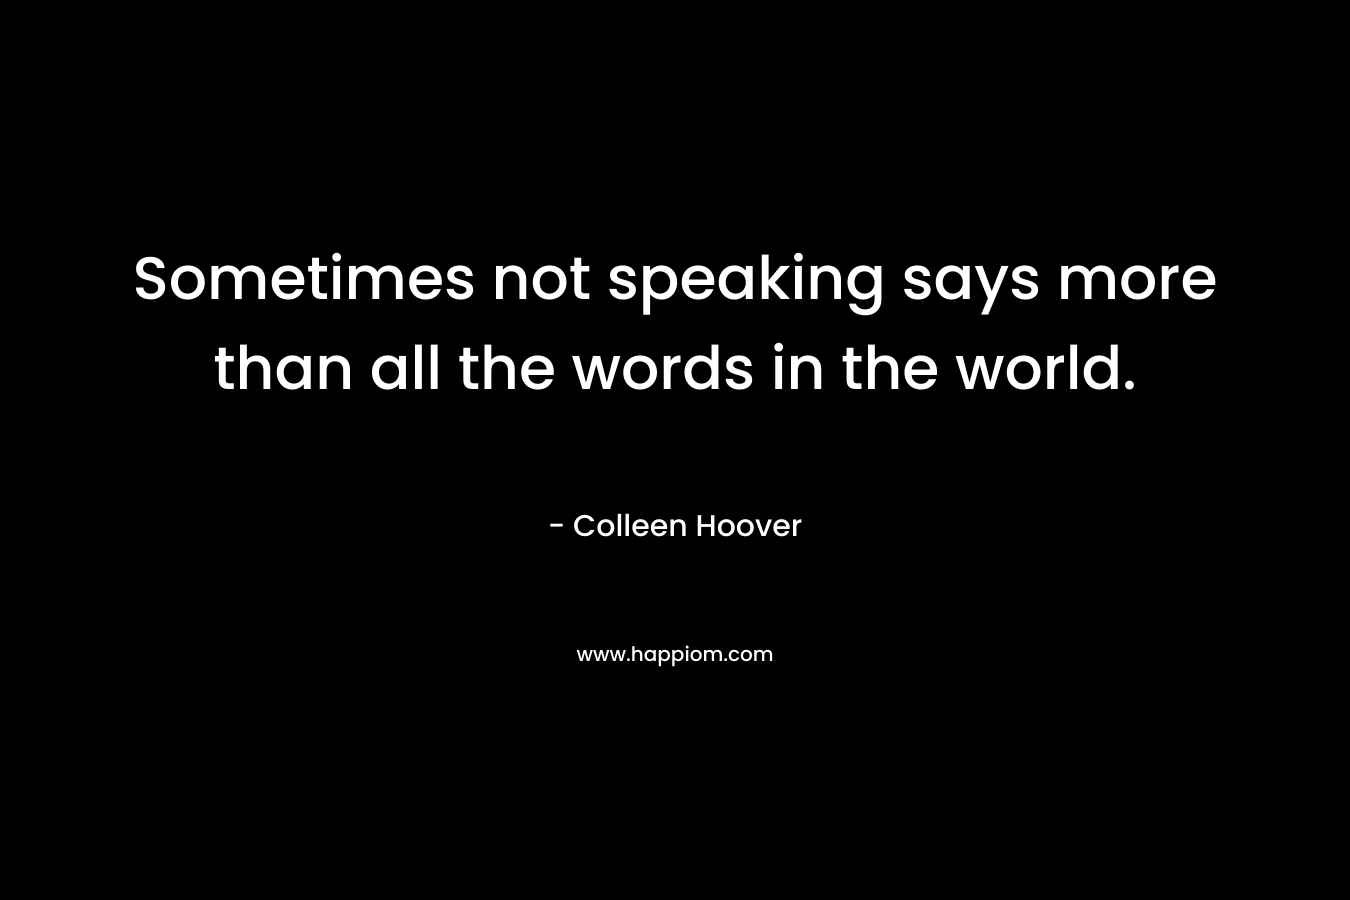 Sometimes not speaking says more than all the words in the world.